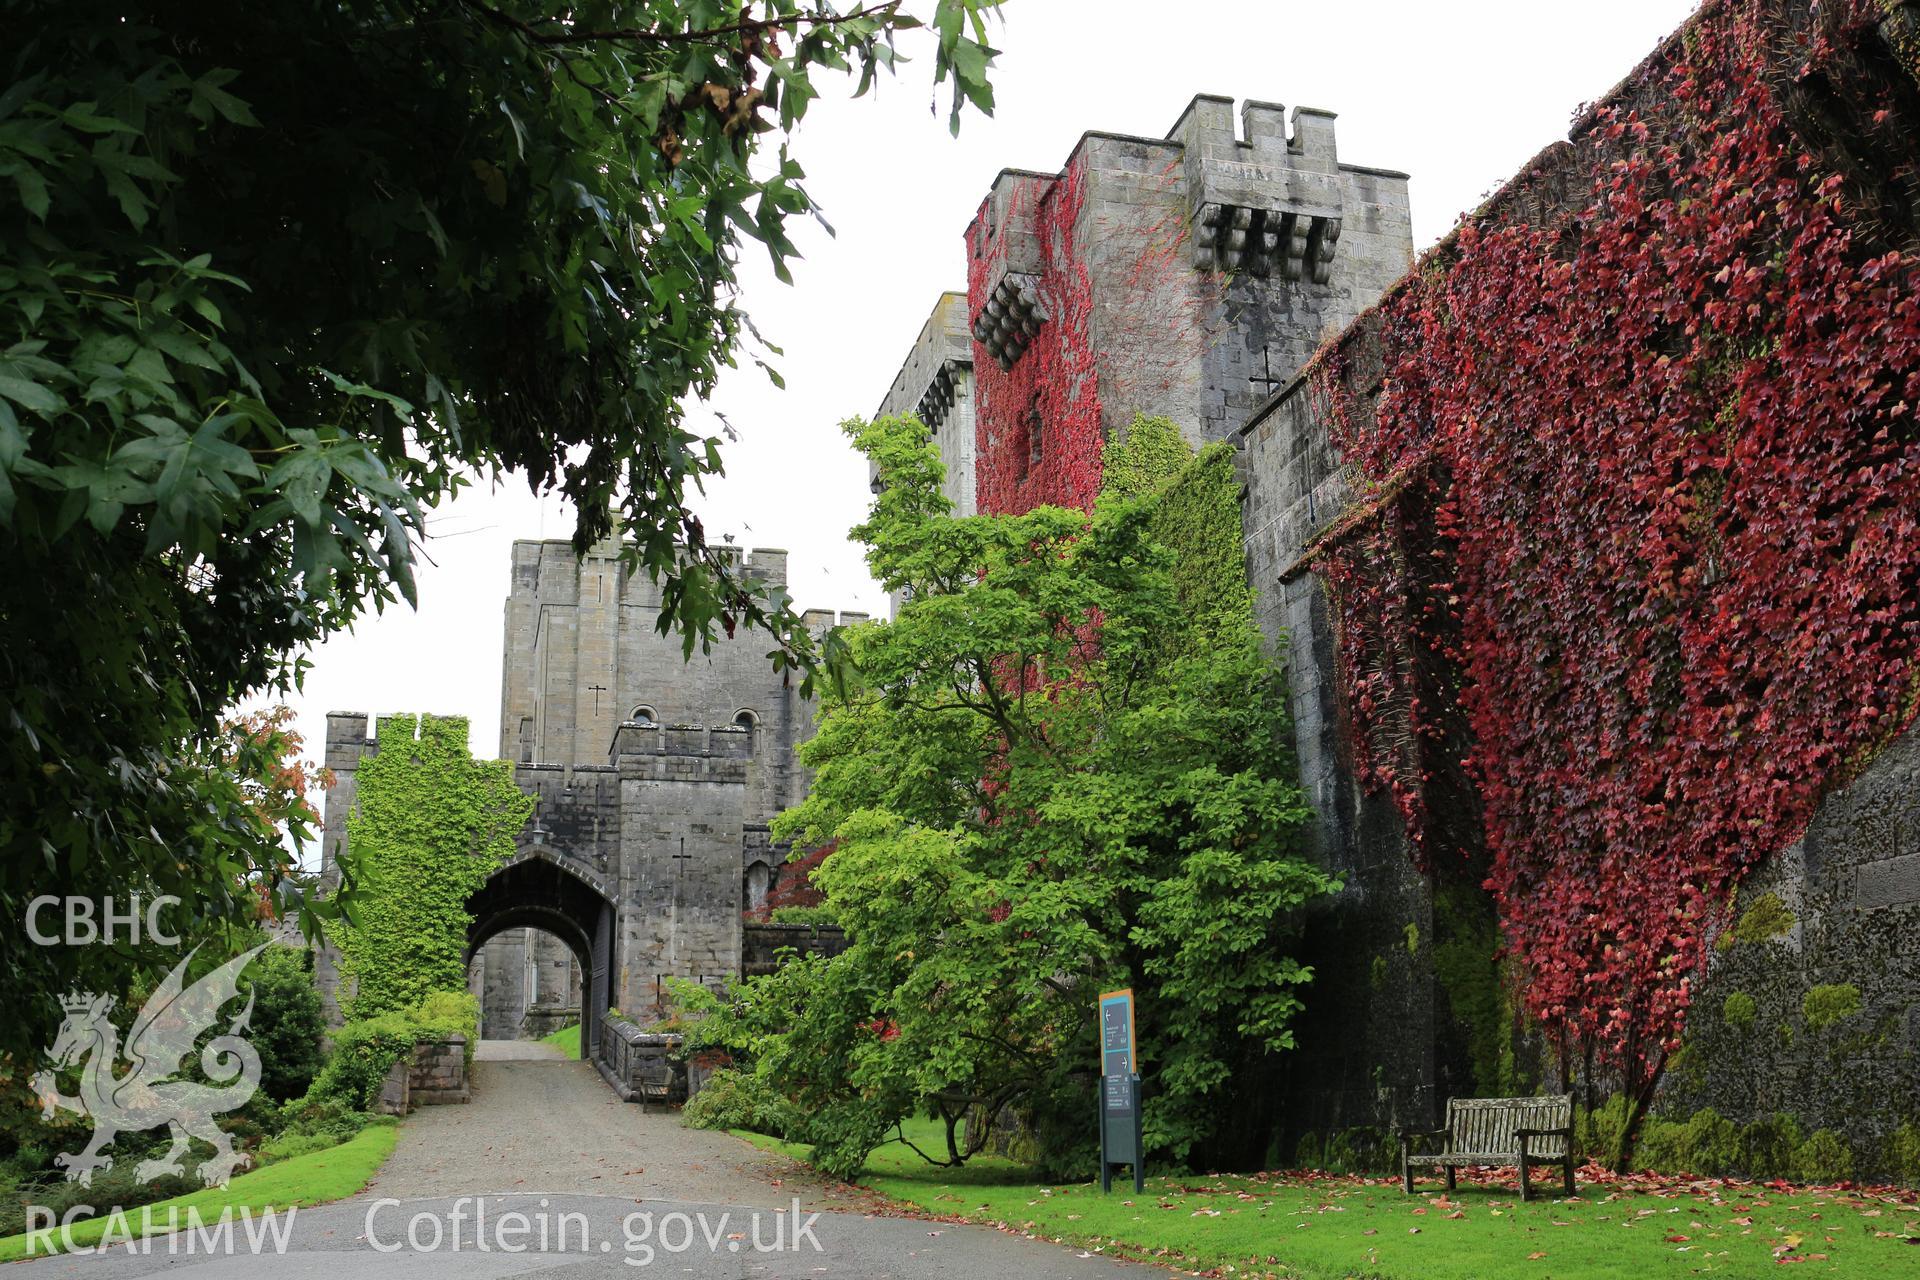 Photographic survey of Penrhyn Castle, Bangor. East front, gate and porch.